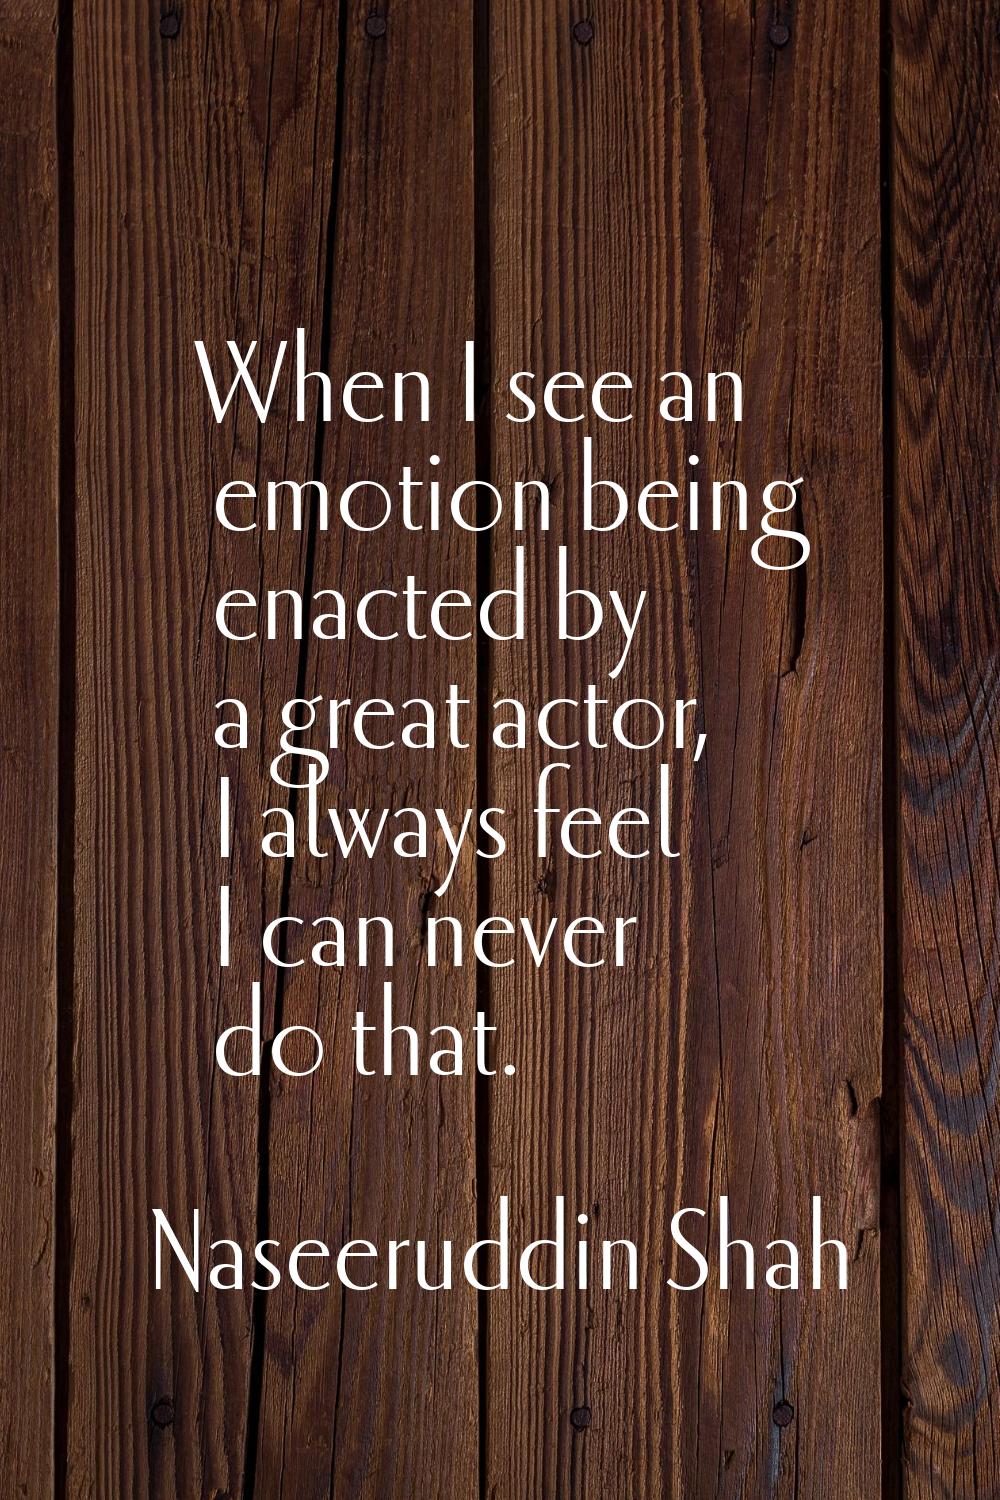 When I see an emotion being enacted by a great actor, I always feel I can never do that.